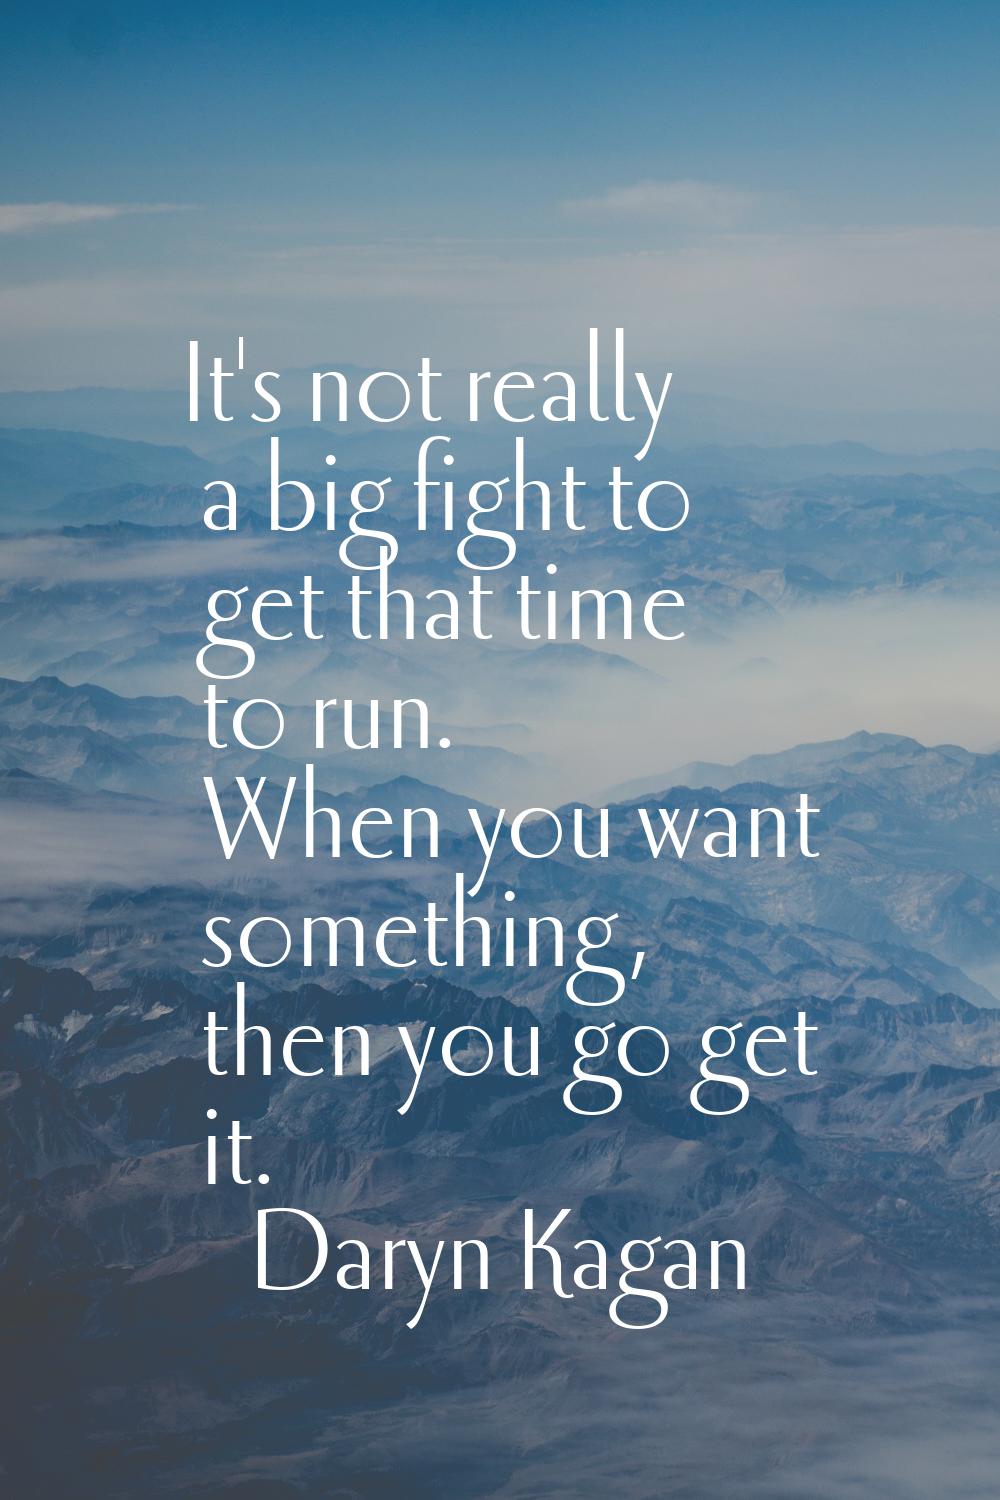 It's not really a big fight to get that time to run. When you want something, then you go get it.